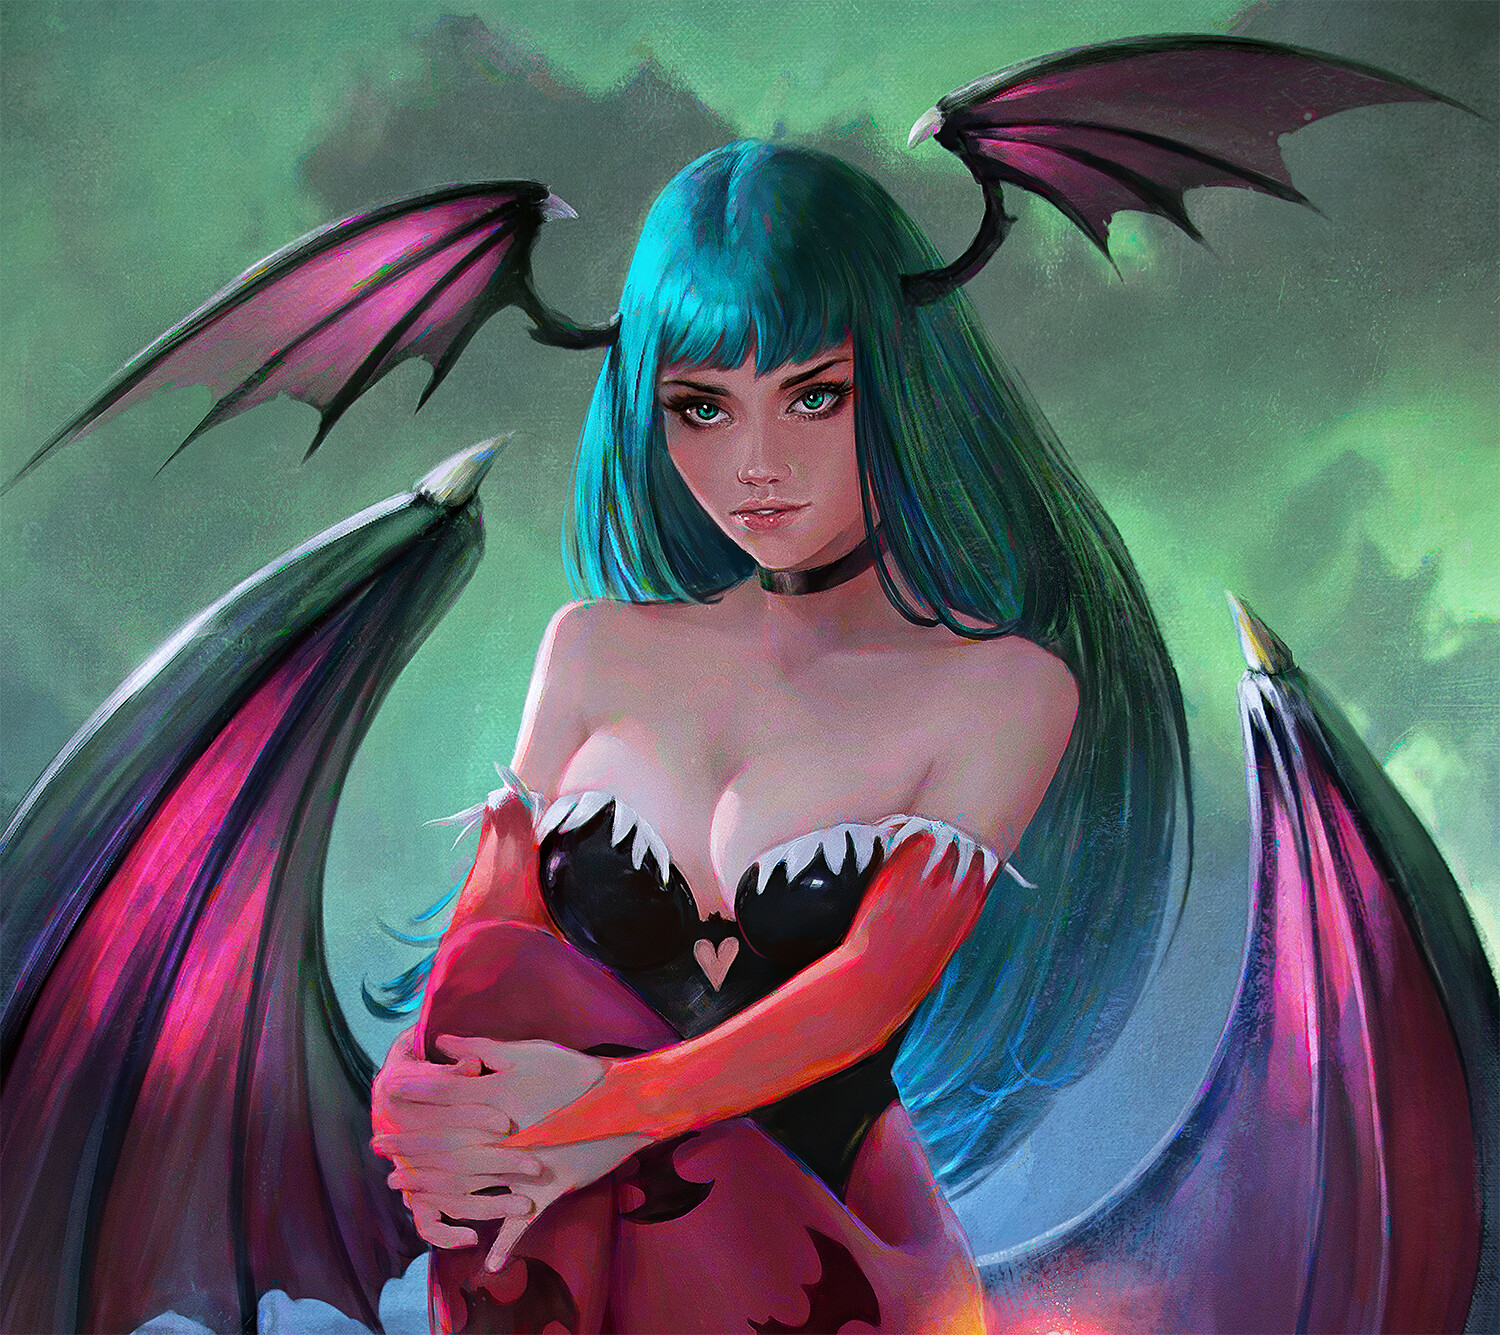 Date with Morrigan by Oliver Wetter.